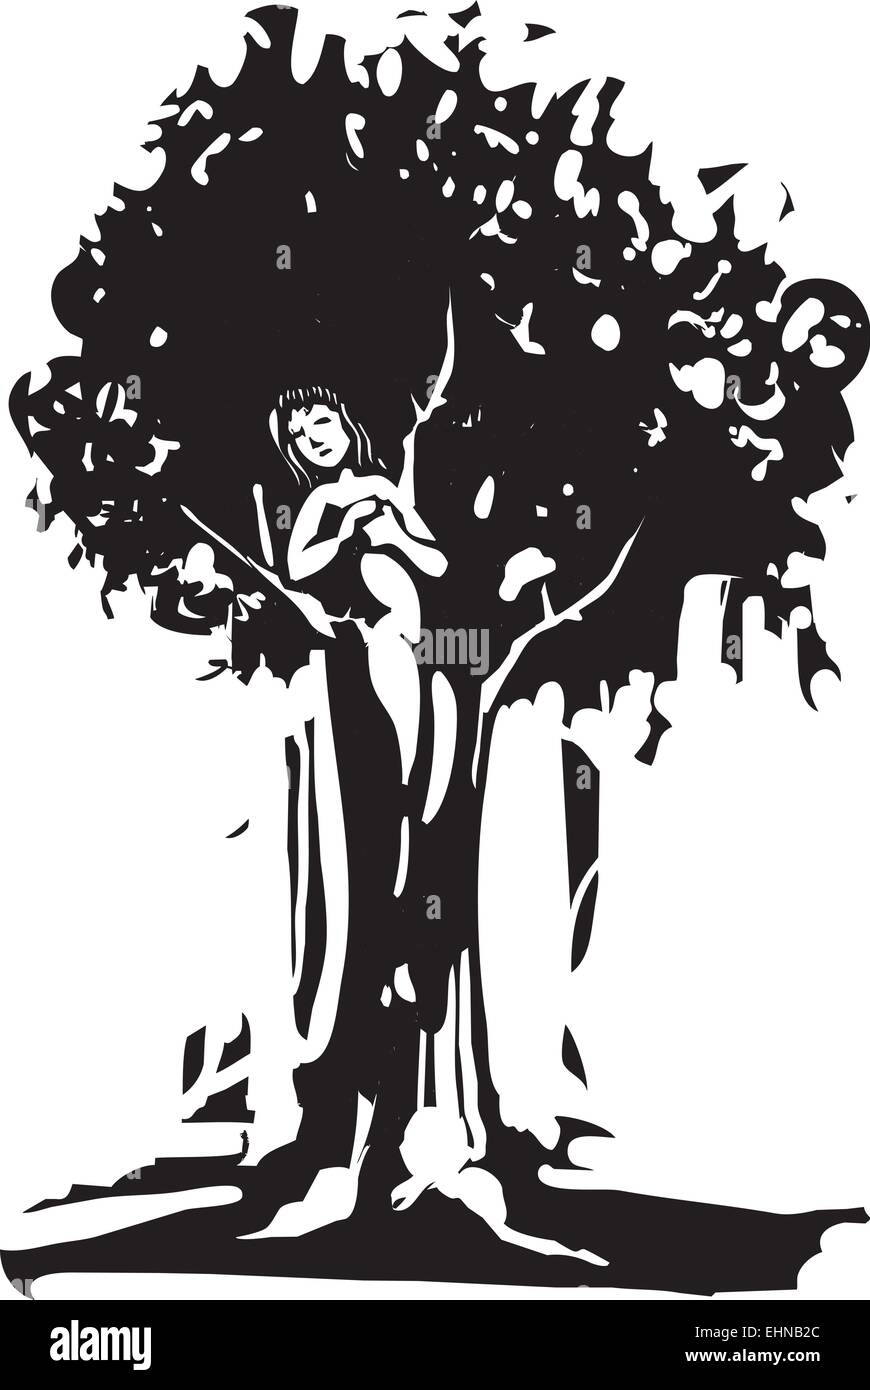 Woodcut style image of the Dryad tree spirit from Greek myth. Stock Vector